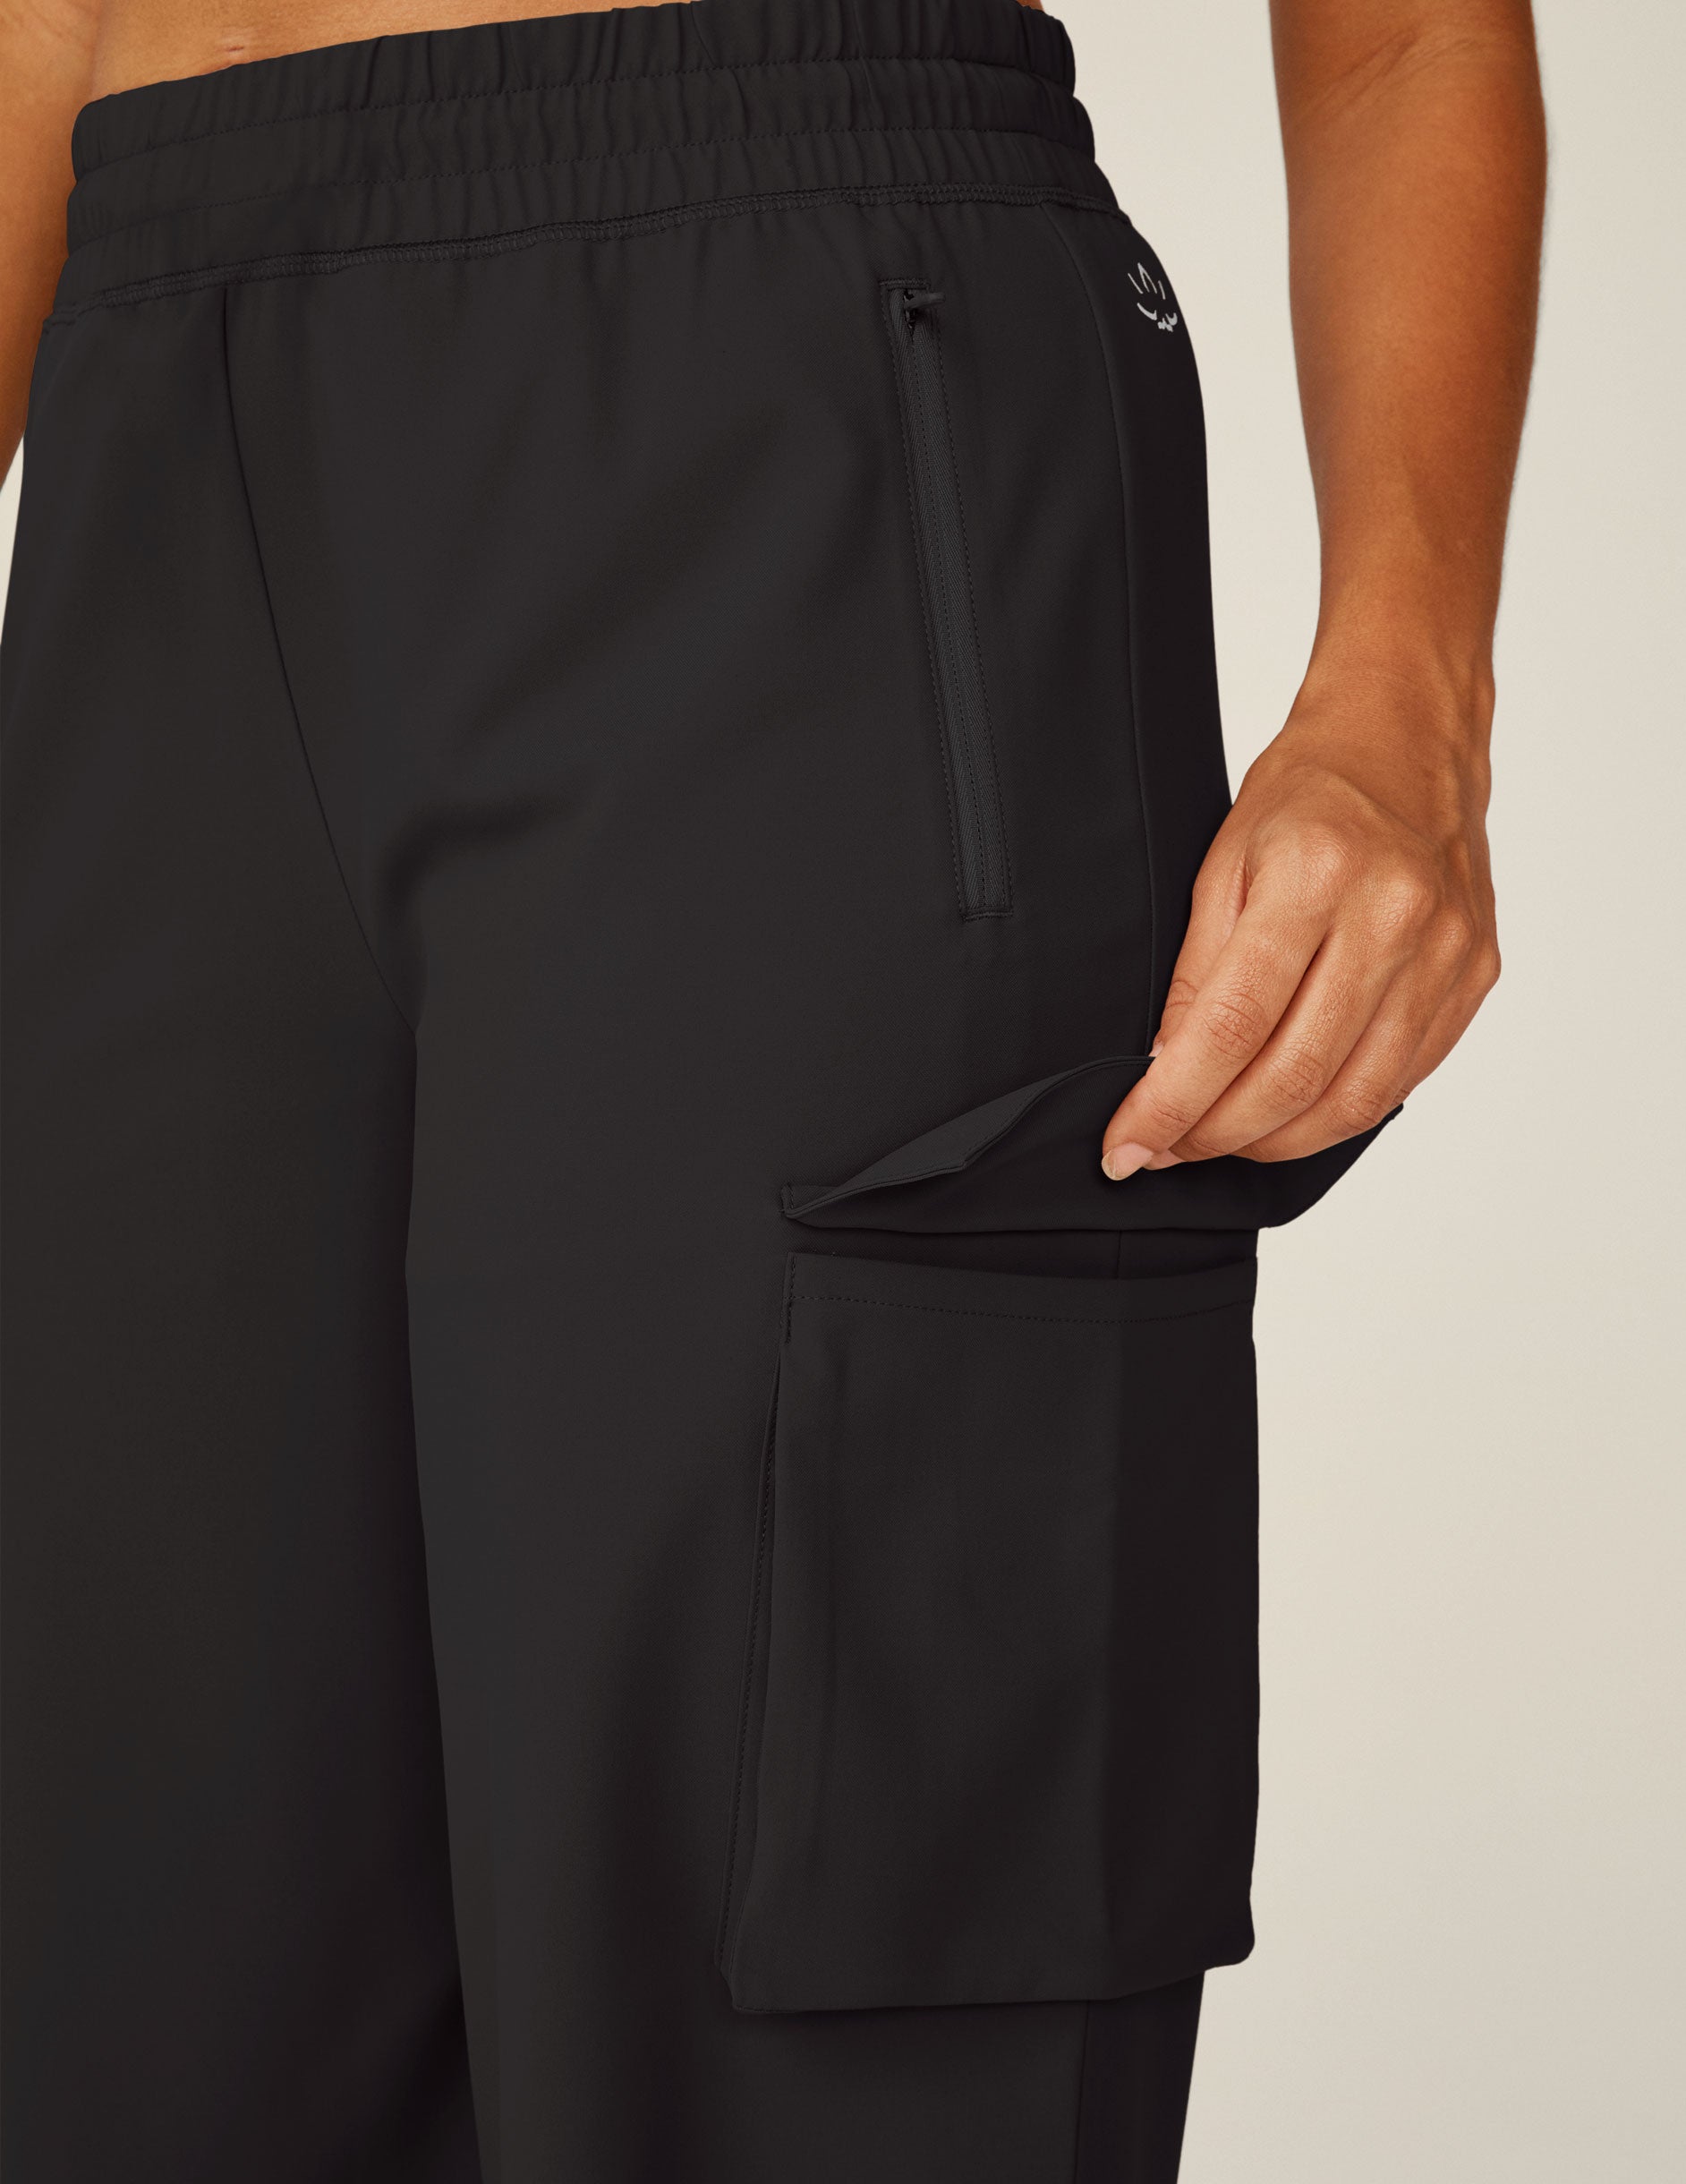 black cargo style pants with pockets. 